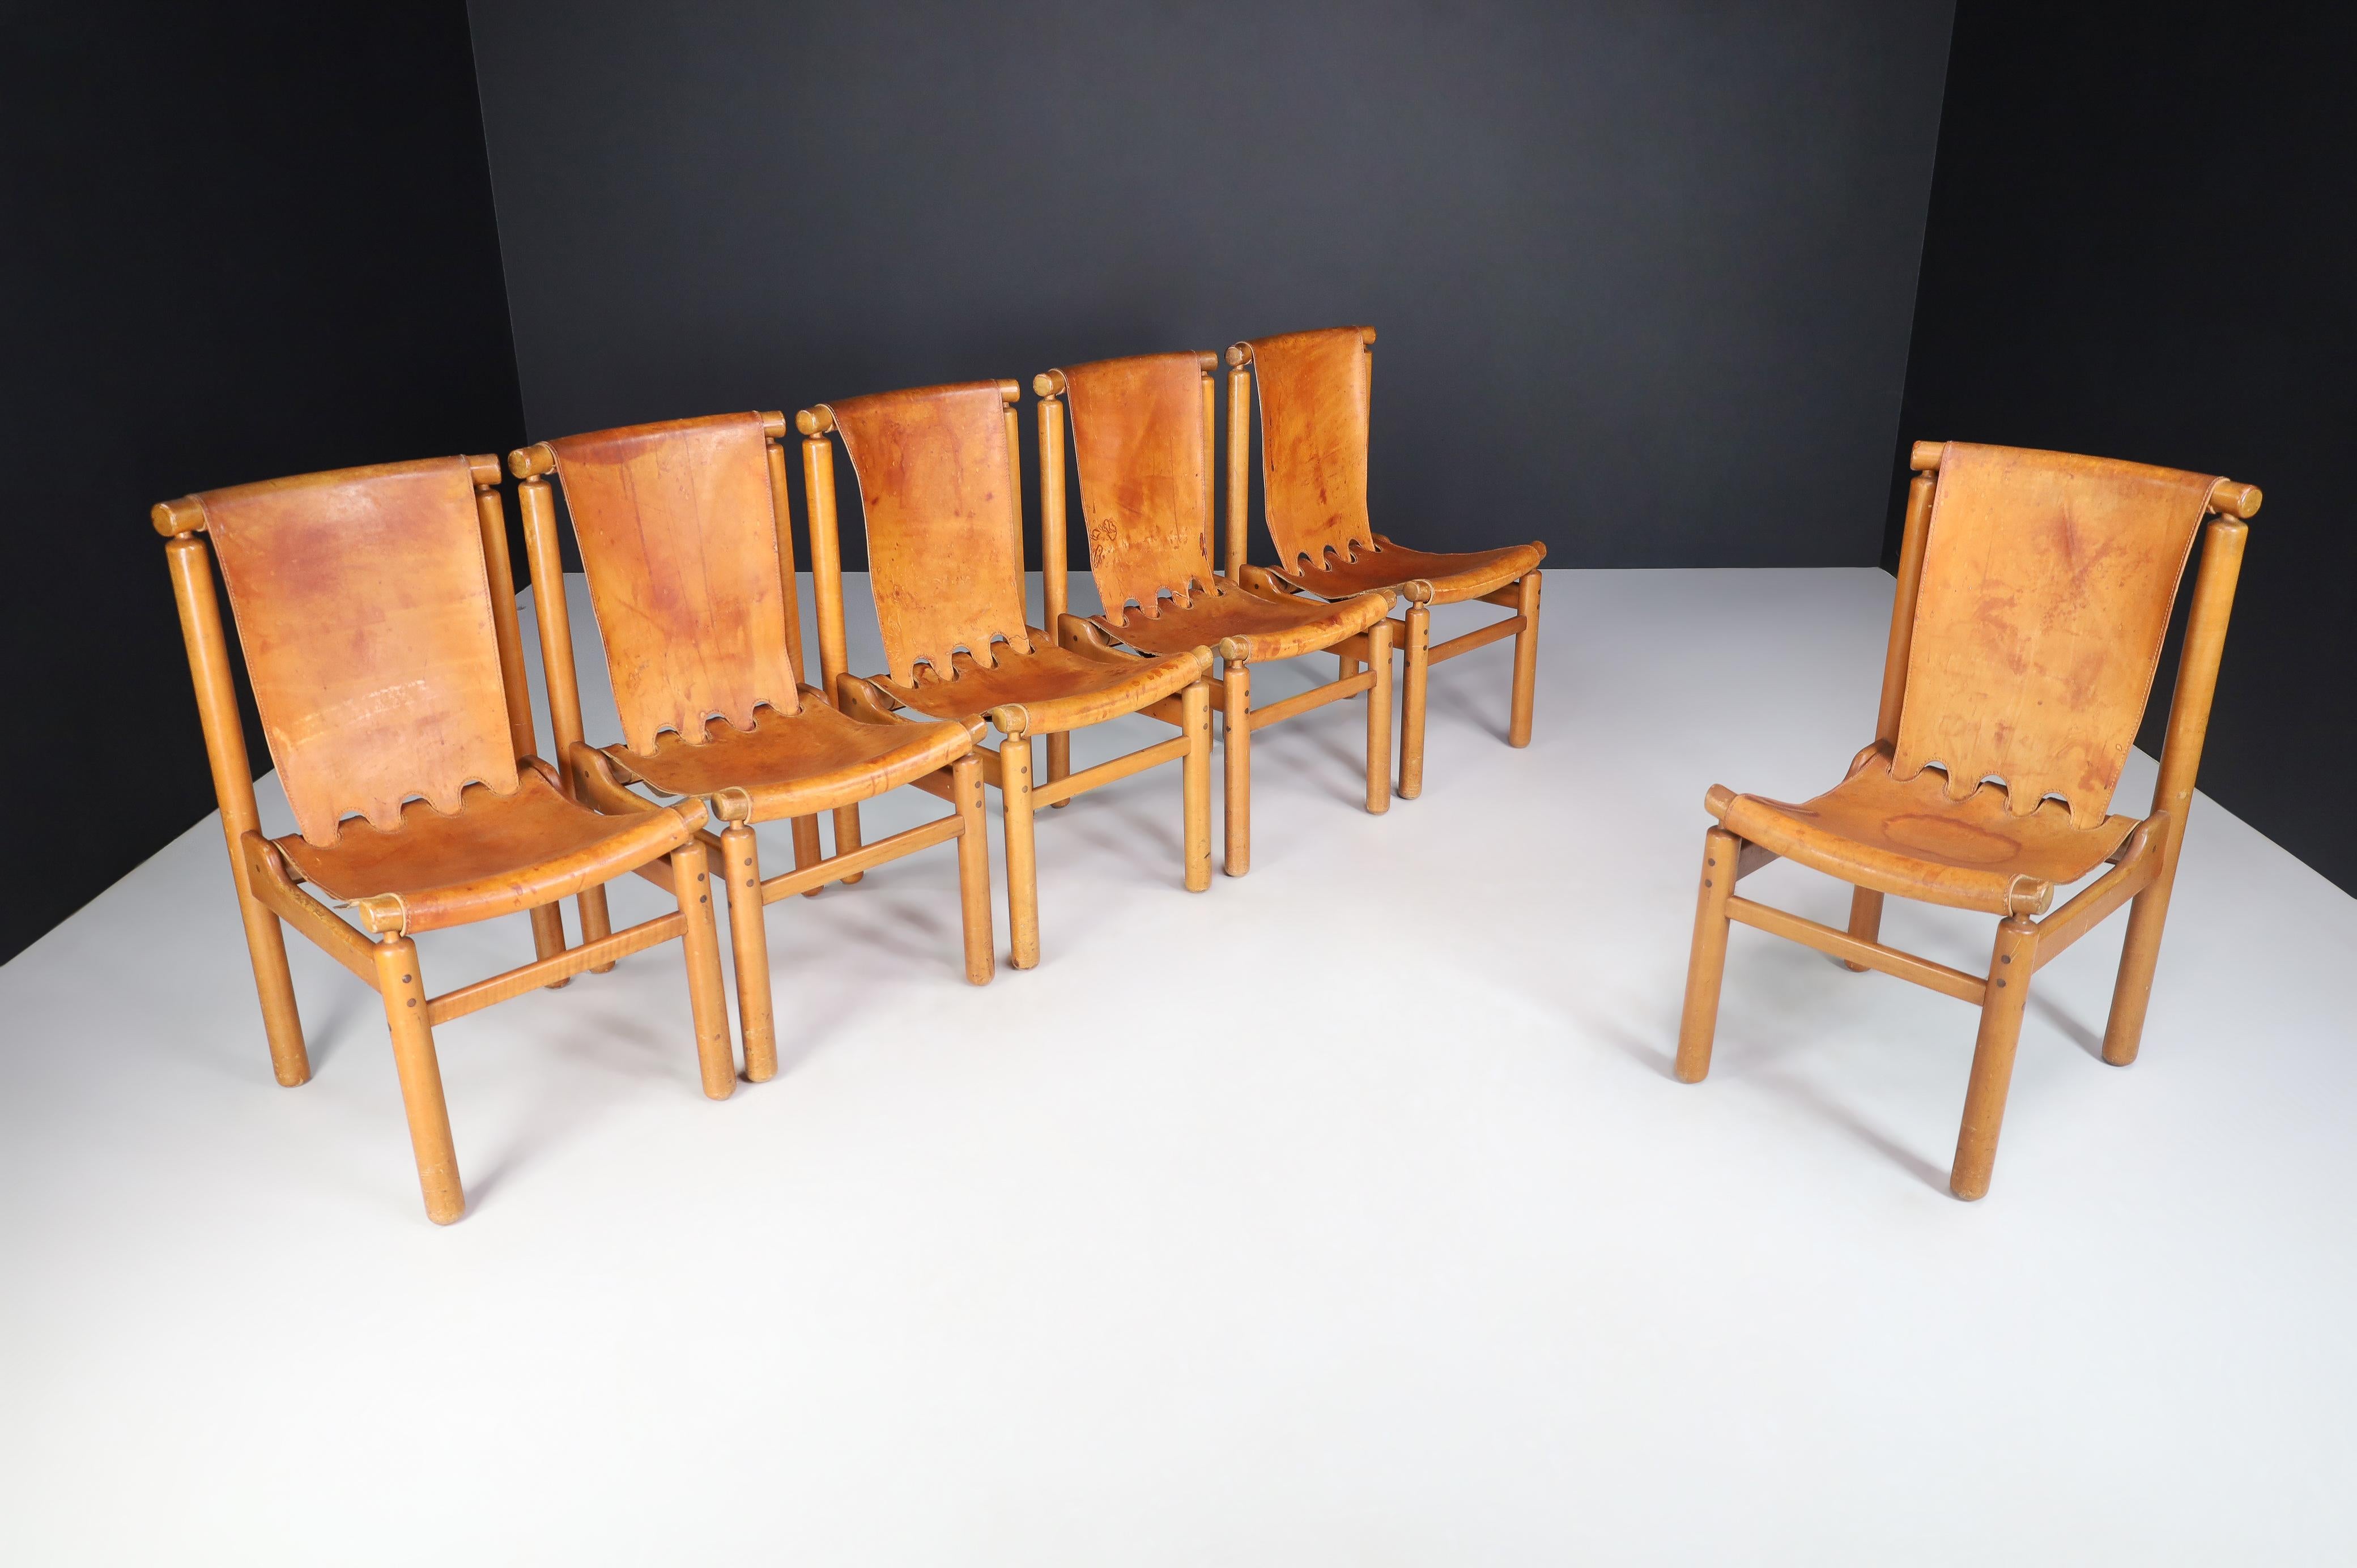 Ilmari Tapiovaara set of ten dining chairs in cognac leather, Finland, the 1950s

Ilmari Tapiovaara's chairs, crafted in Finland during the 1950s for La Permanente Mobili Cantù, are a true marvel of design. With a sturdy, darkened beech frame and